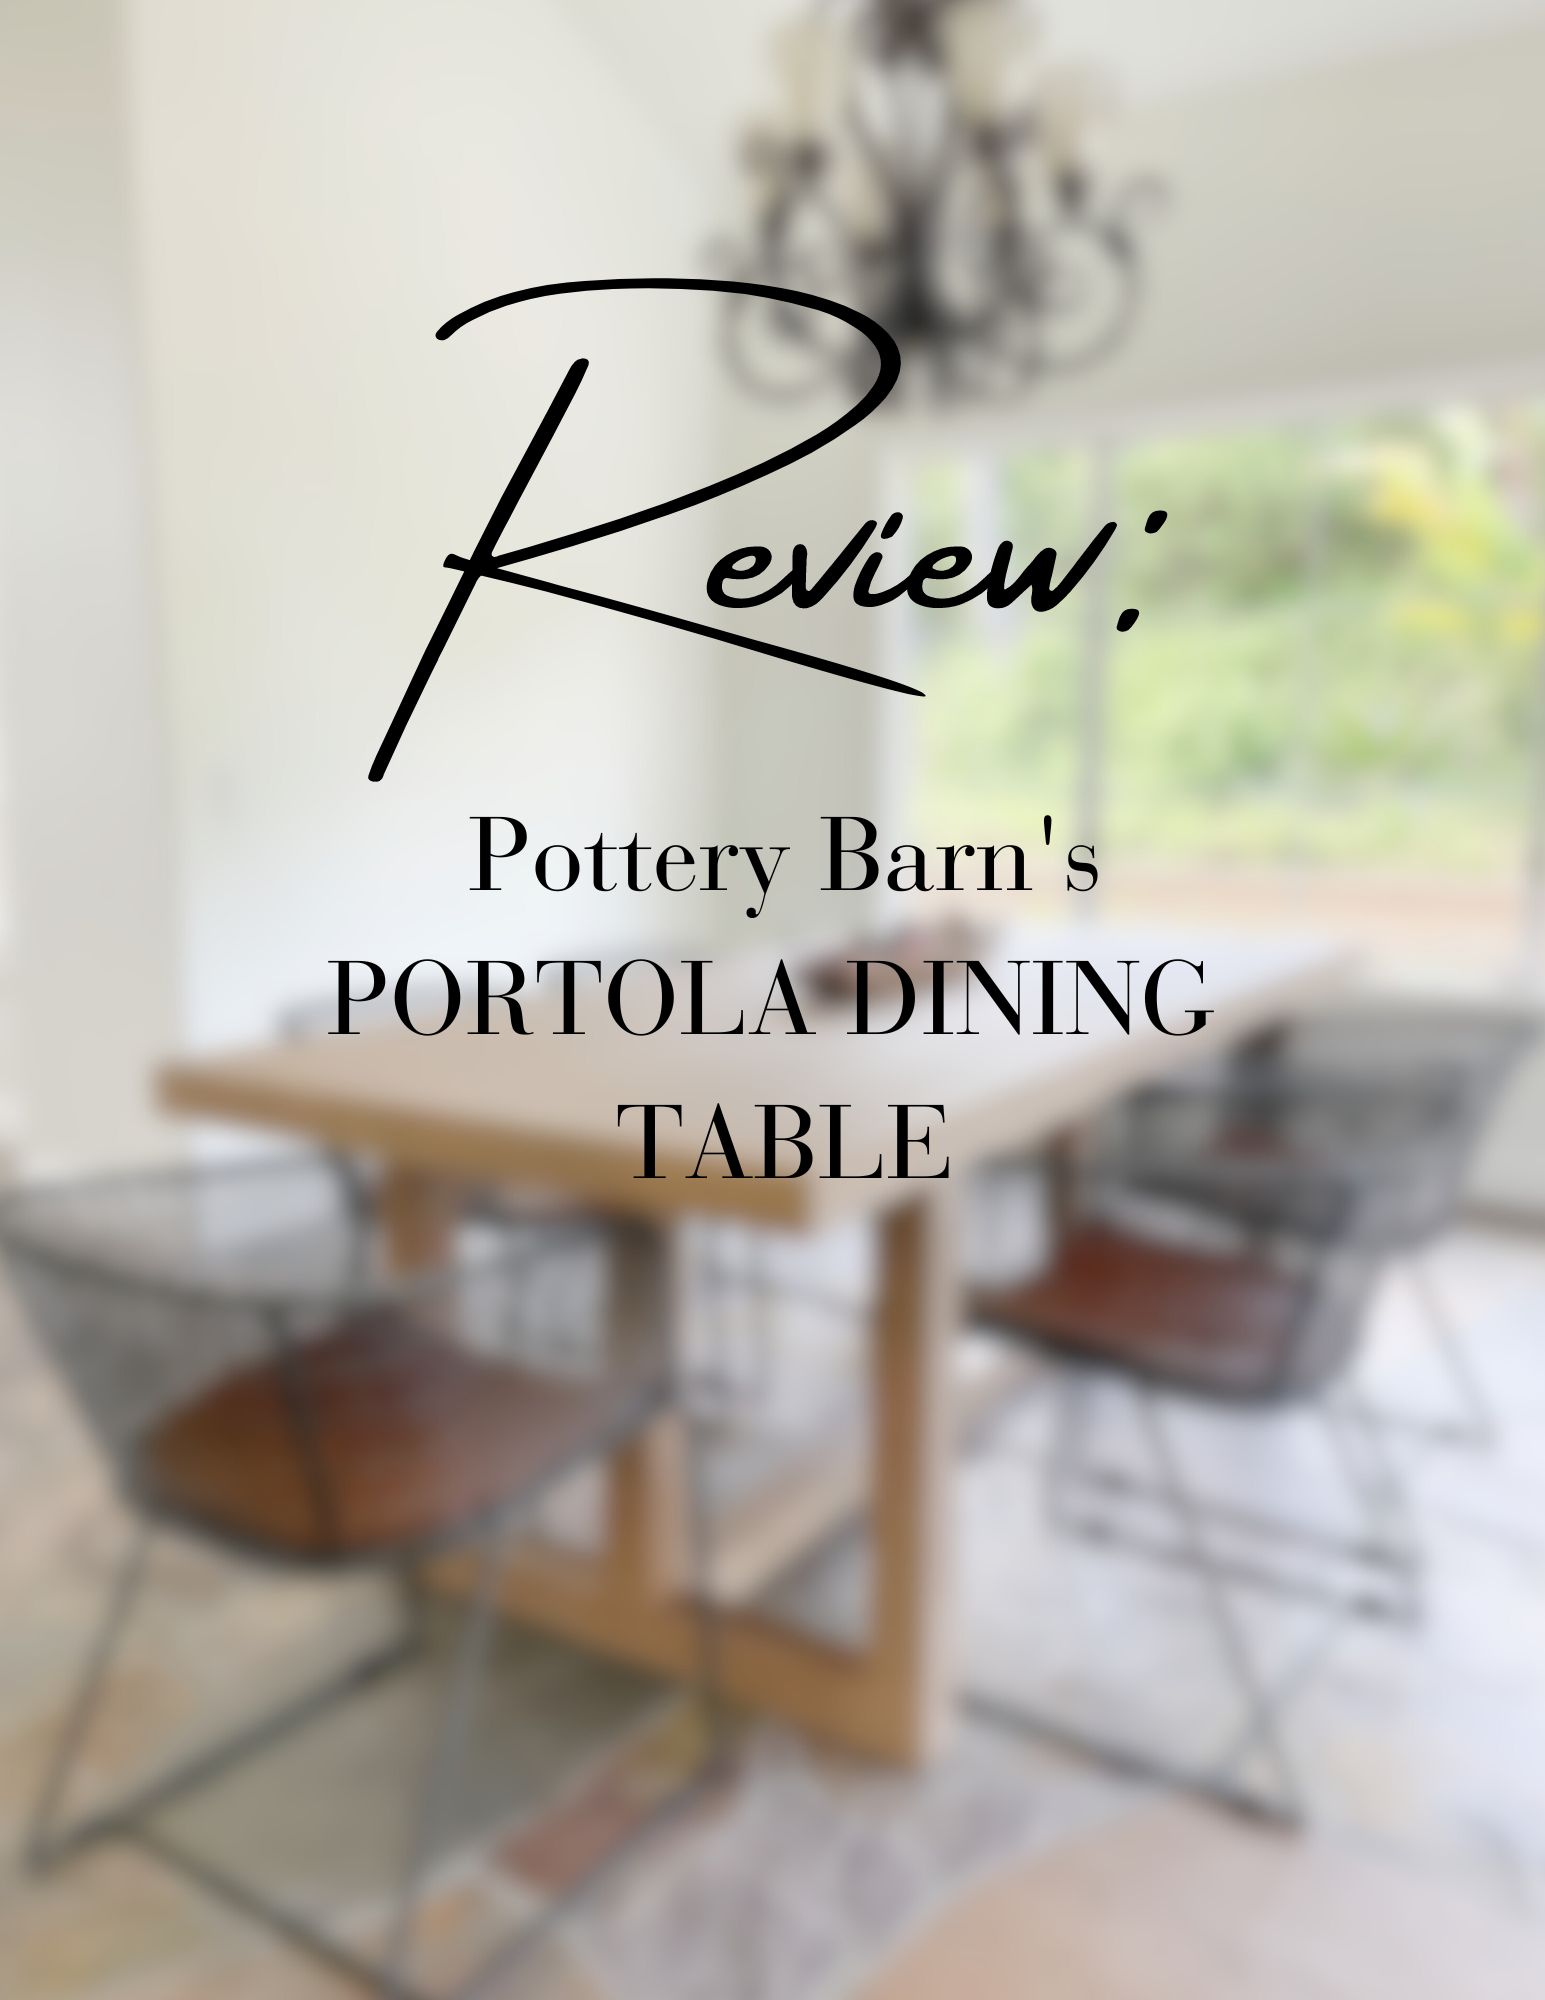 full review of the Portola dining table from Pottery Barn